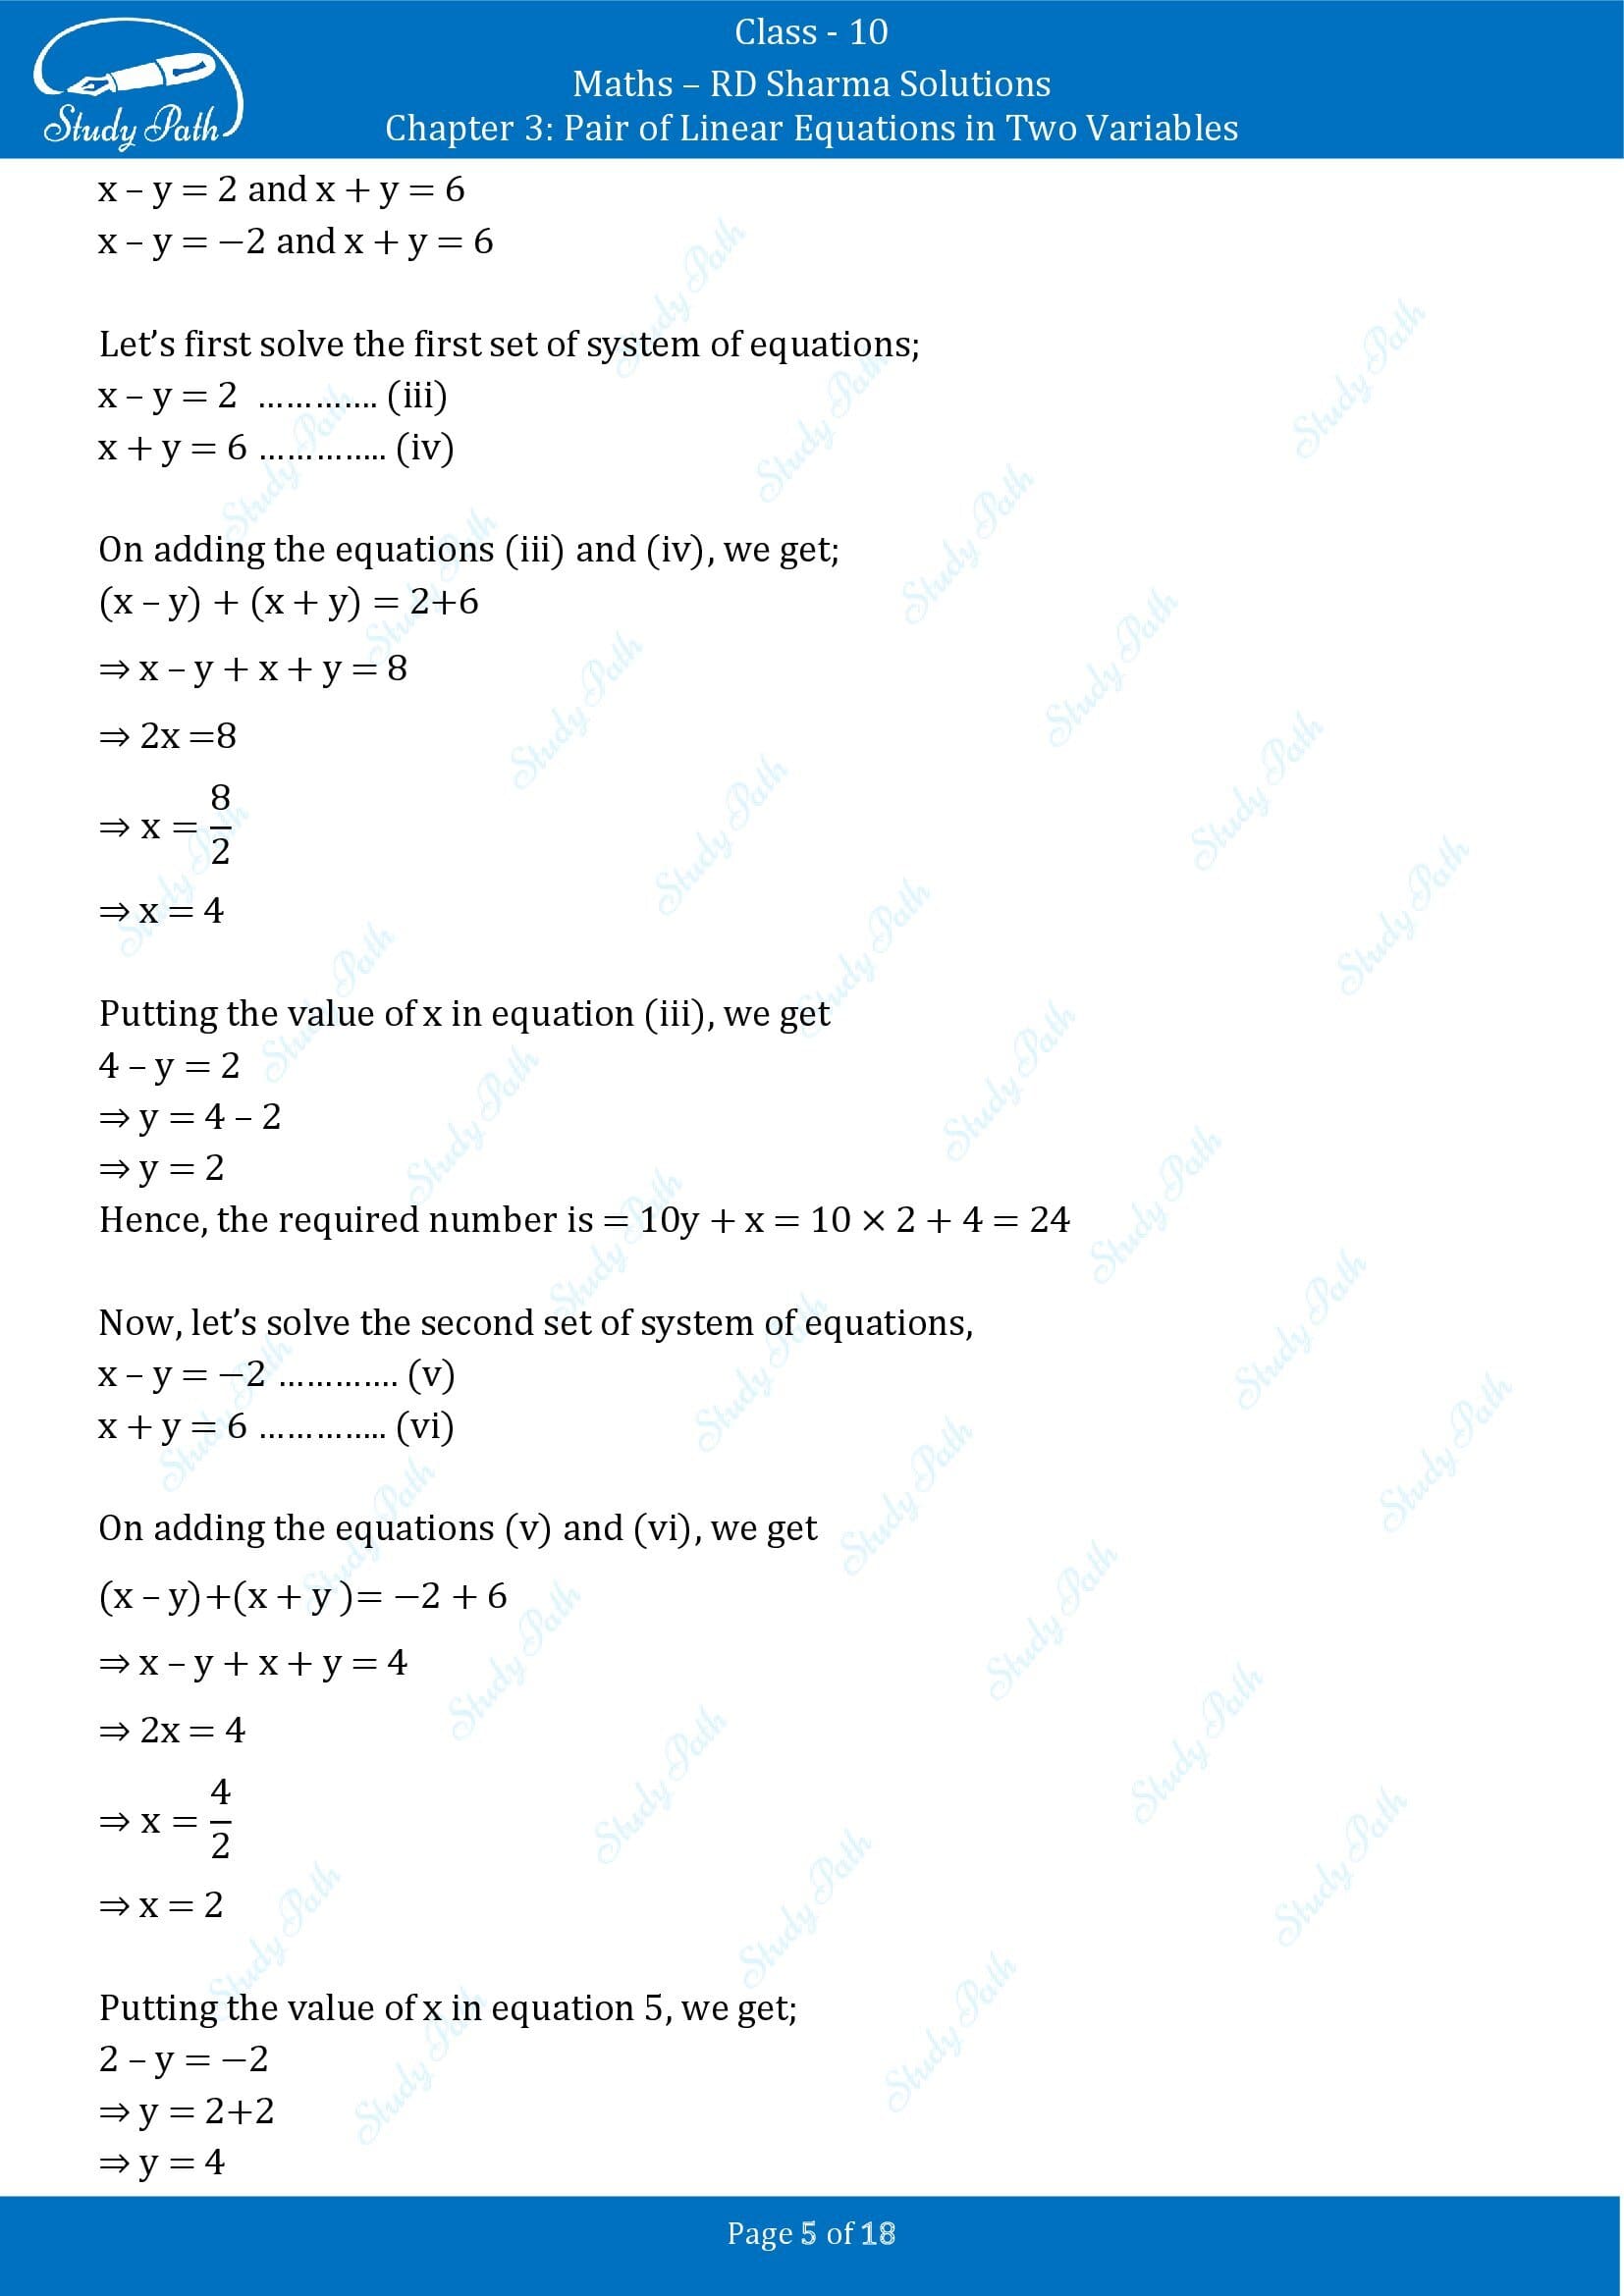 RD Sharma Solutions Class 10 Chapter 3 Pair of Linear Equations in Two Variables Exercise 3.7 00005